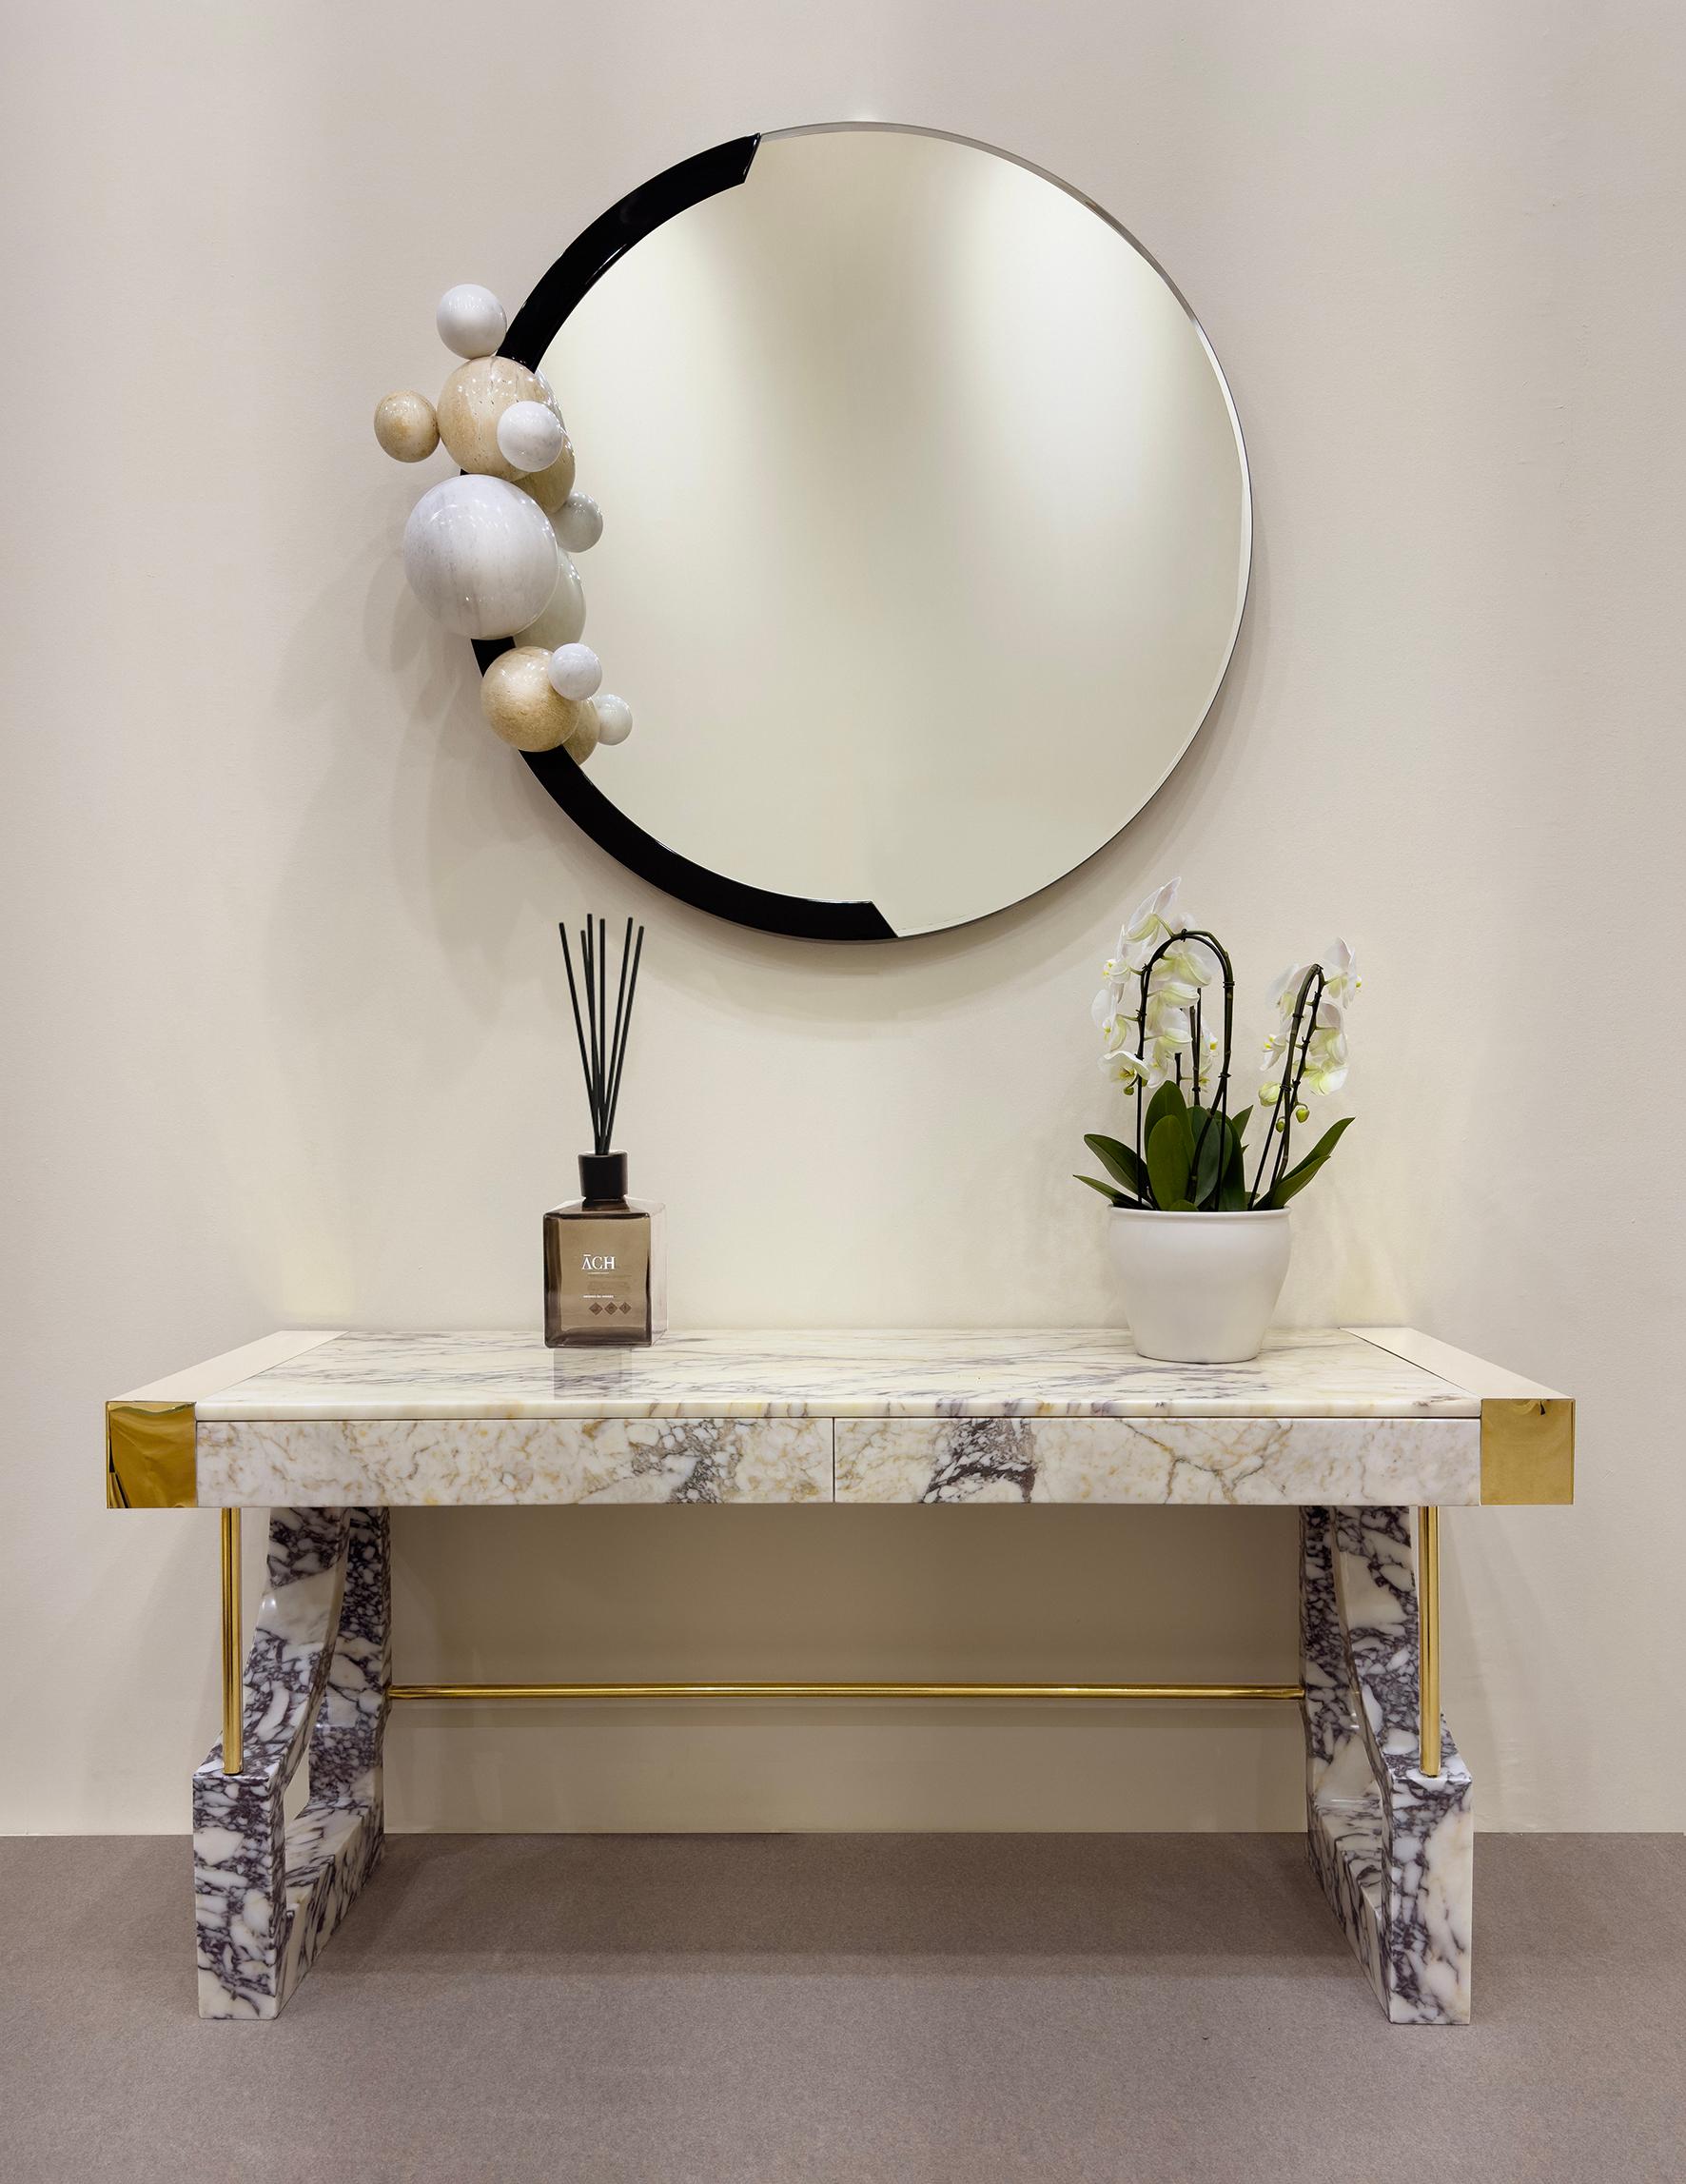 Polished 21st Century Modern Wall Mirror White Marble Spheres With Incorporated Light For Sale